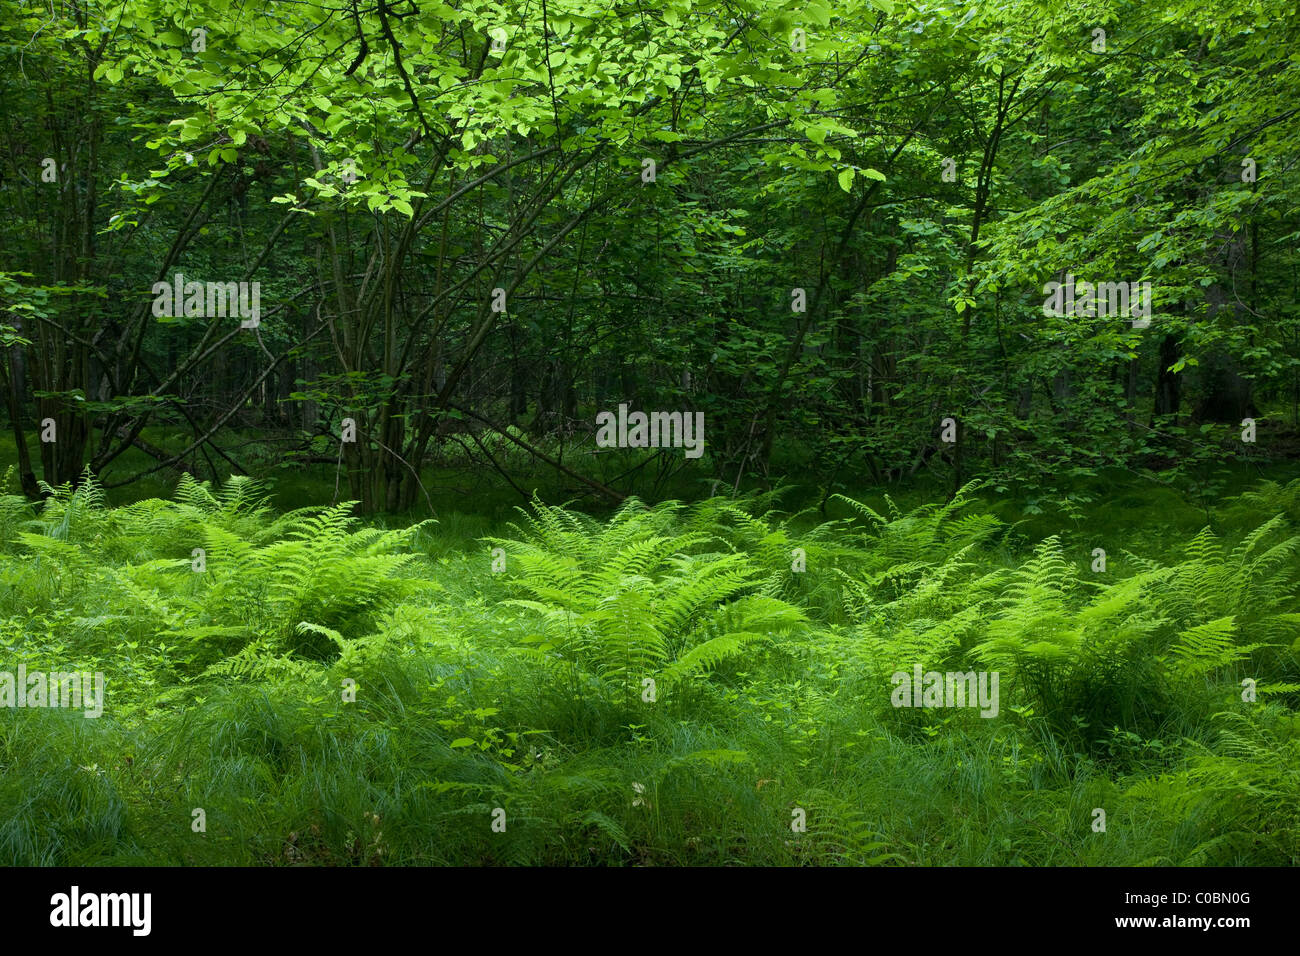 Shady deciduous stand of Bialowieza Forest in springtime with fresh green grassy bottom and ferns Stock Photo